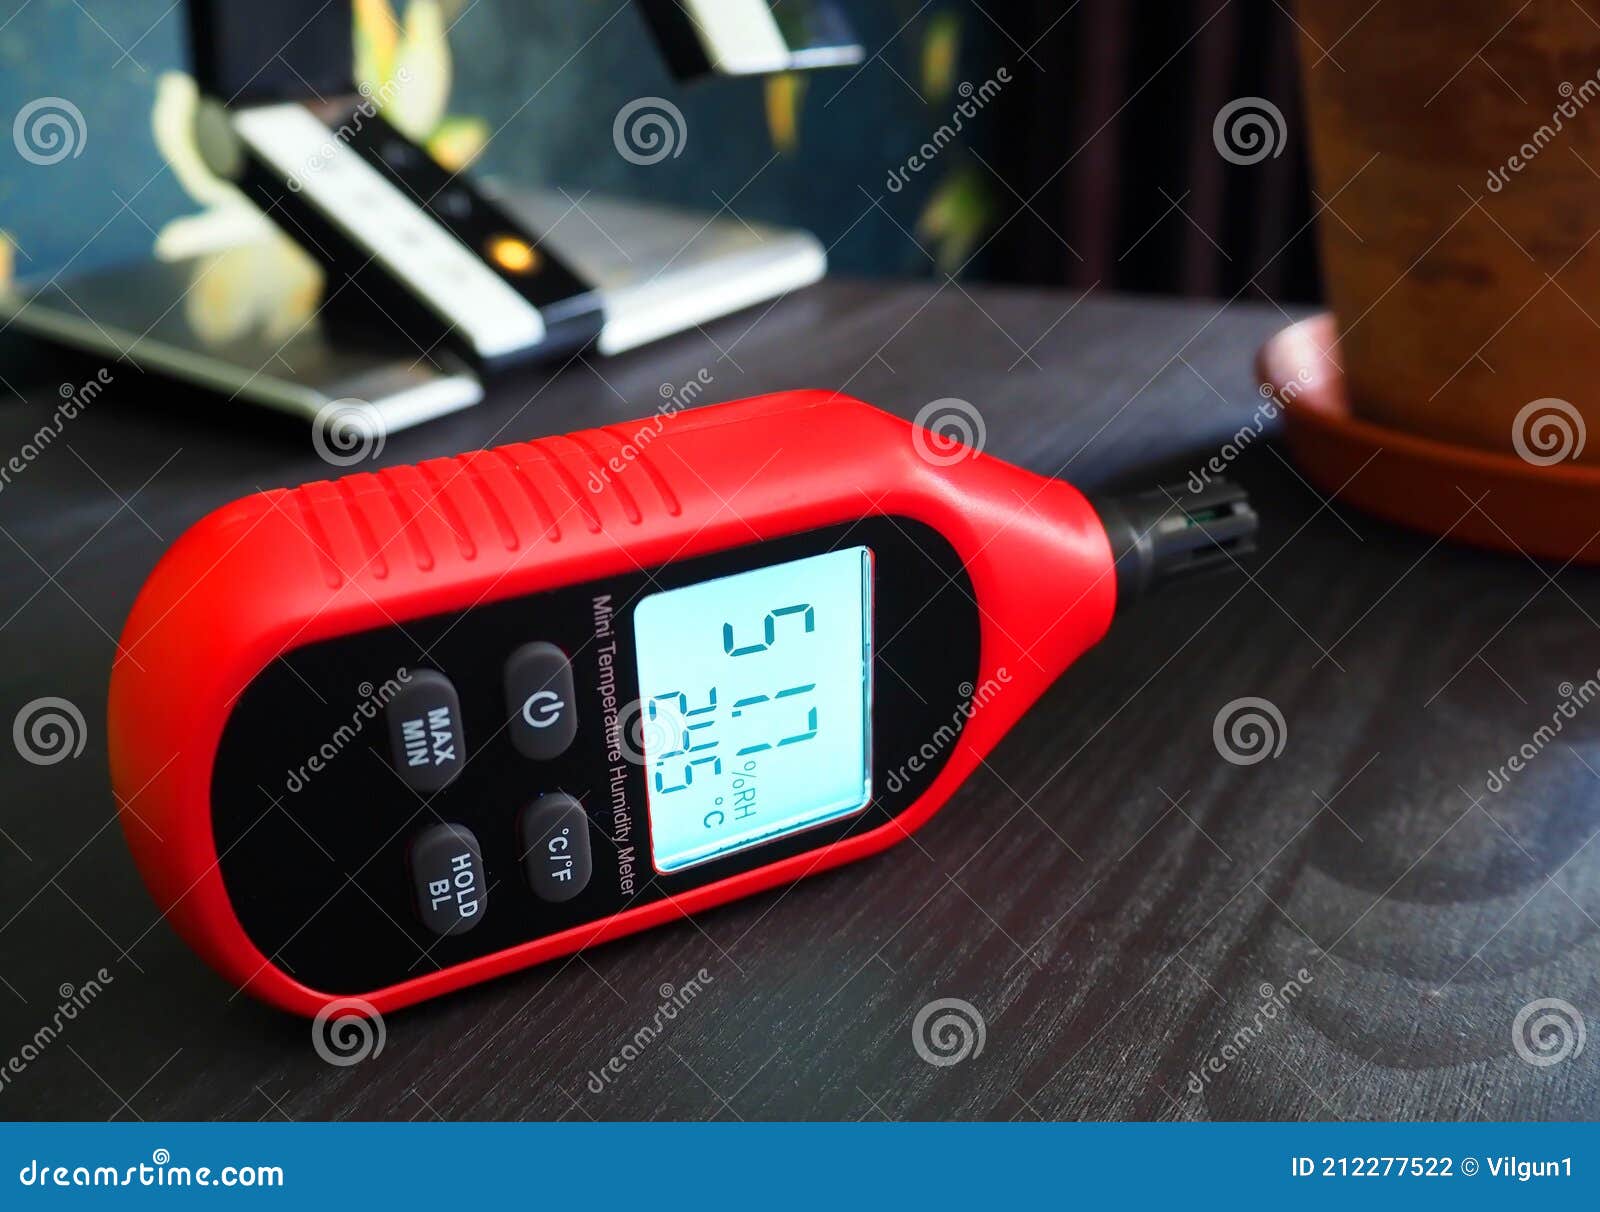 https://thumbs.dreamstime.com/z/hygrometer-measuring-air-humidity-close-up-details-device-temperature-212277522.jpg